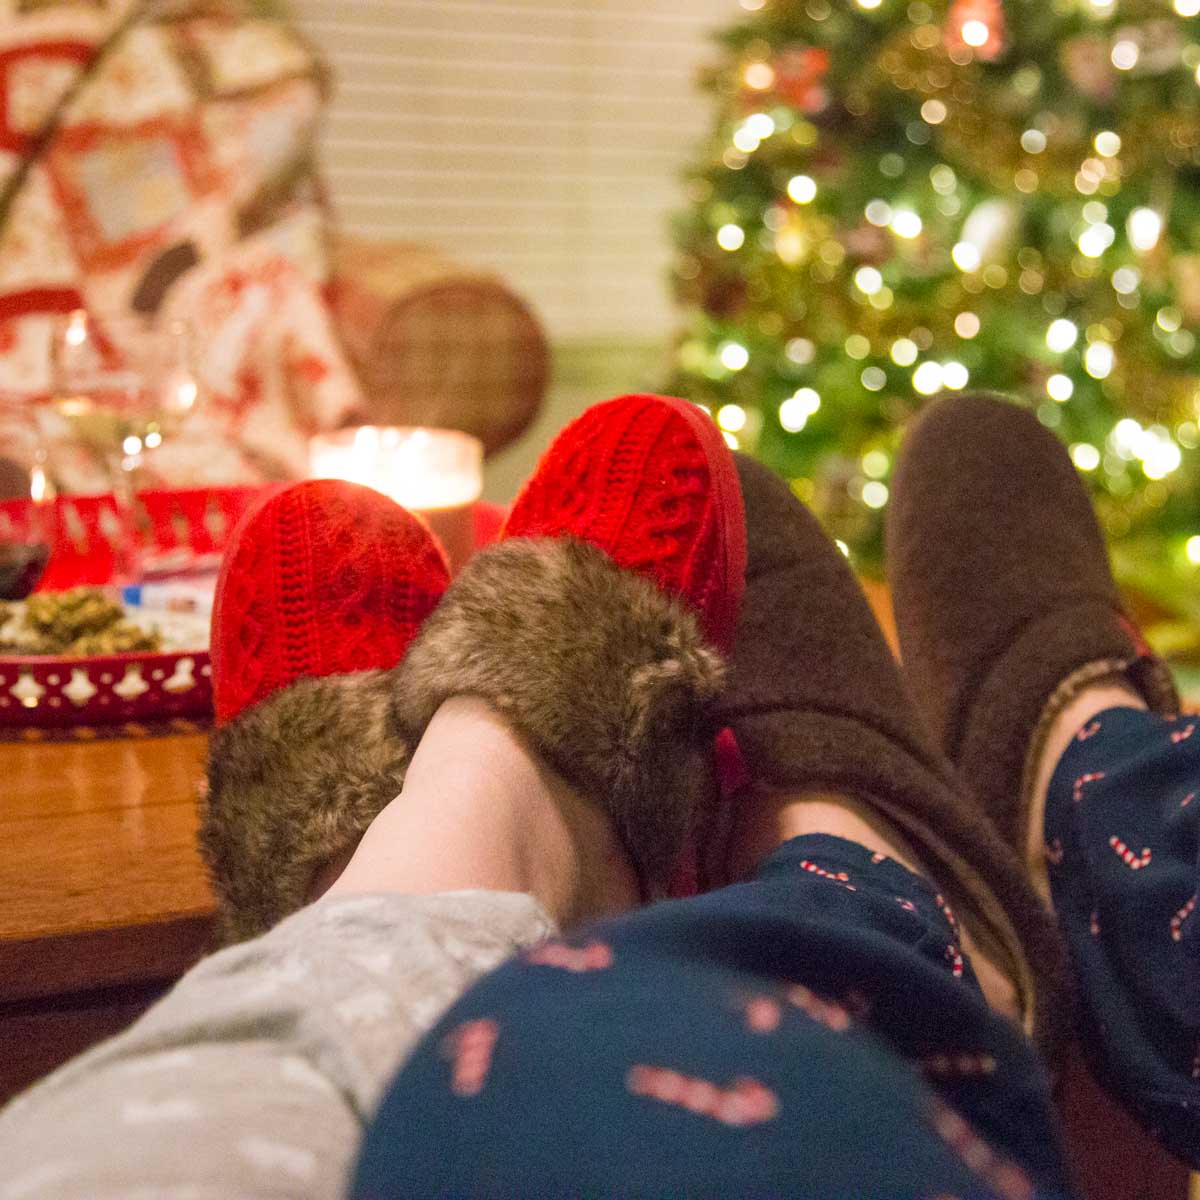 A husband and wife wear Christmas slippers and sit in front of a Christmas tree.